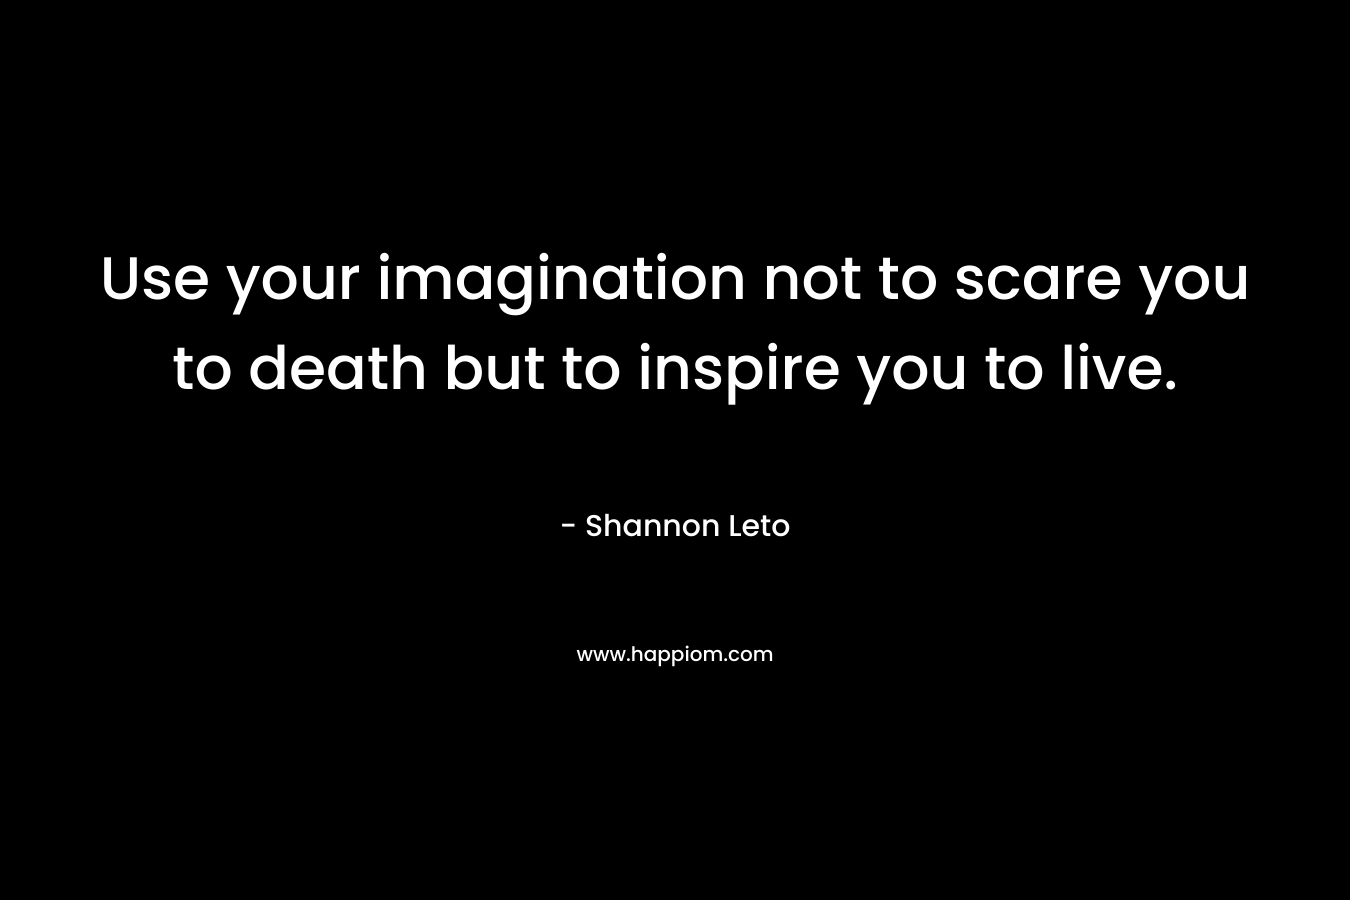 Use your imagination not to scare you to death but to inspire you to live. – Shannon Leto